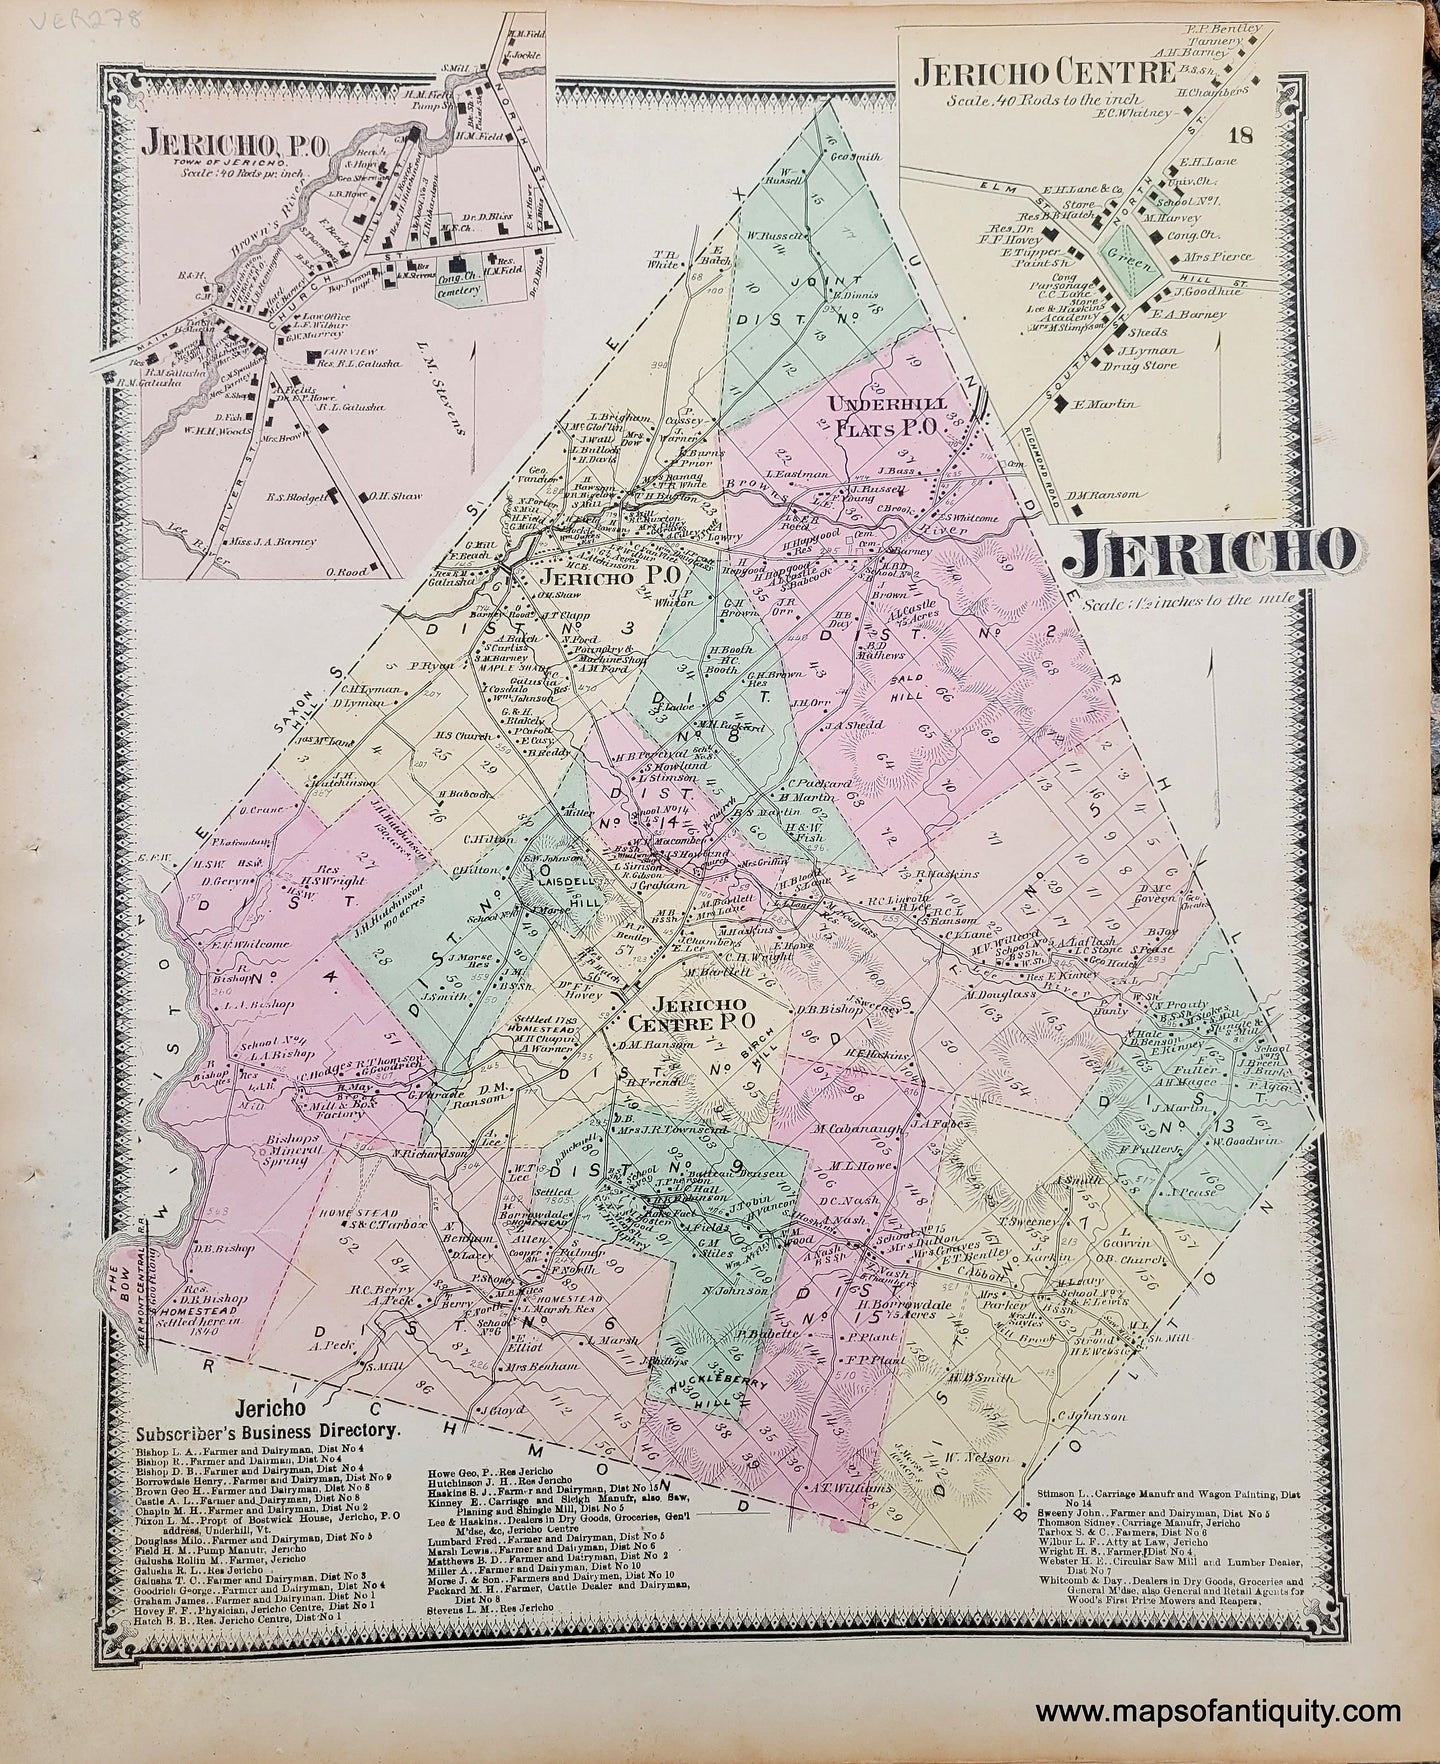 Genuine-Antique-Hand-colored-Map-Jericho-VT--1869-Beers-Ellis-Soule-Maps-Of-Antiquity